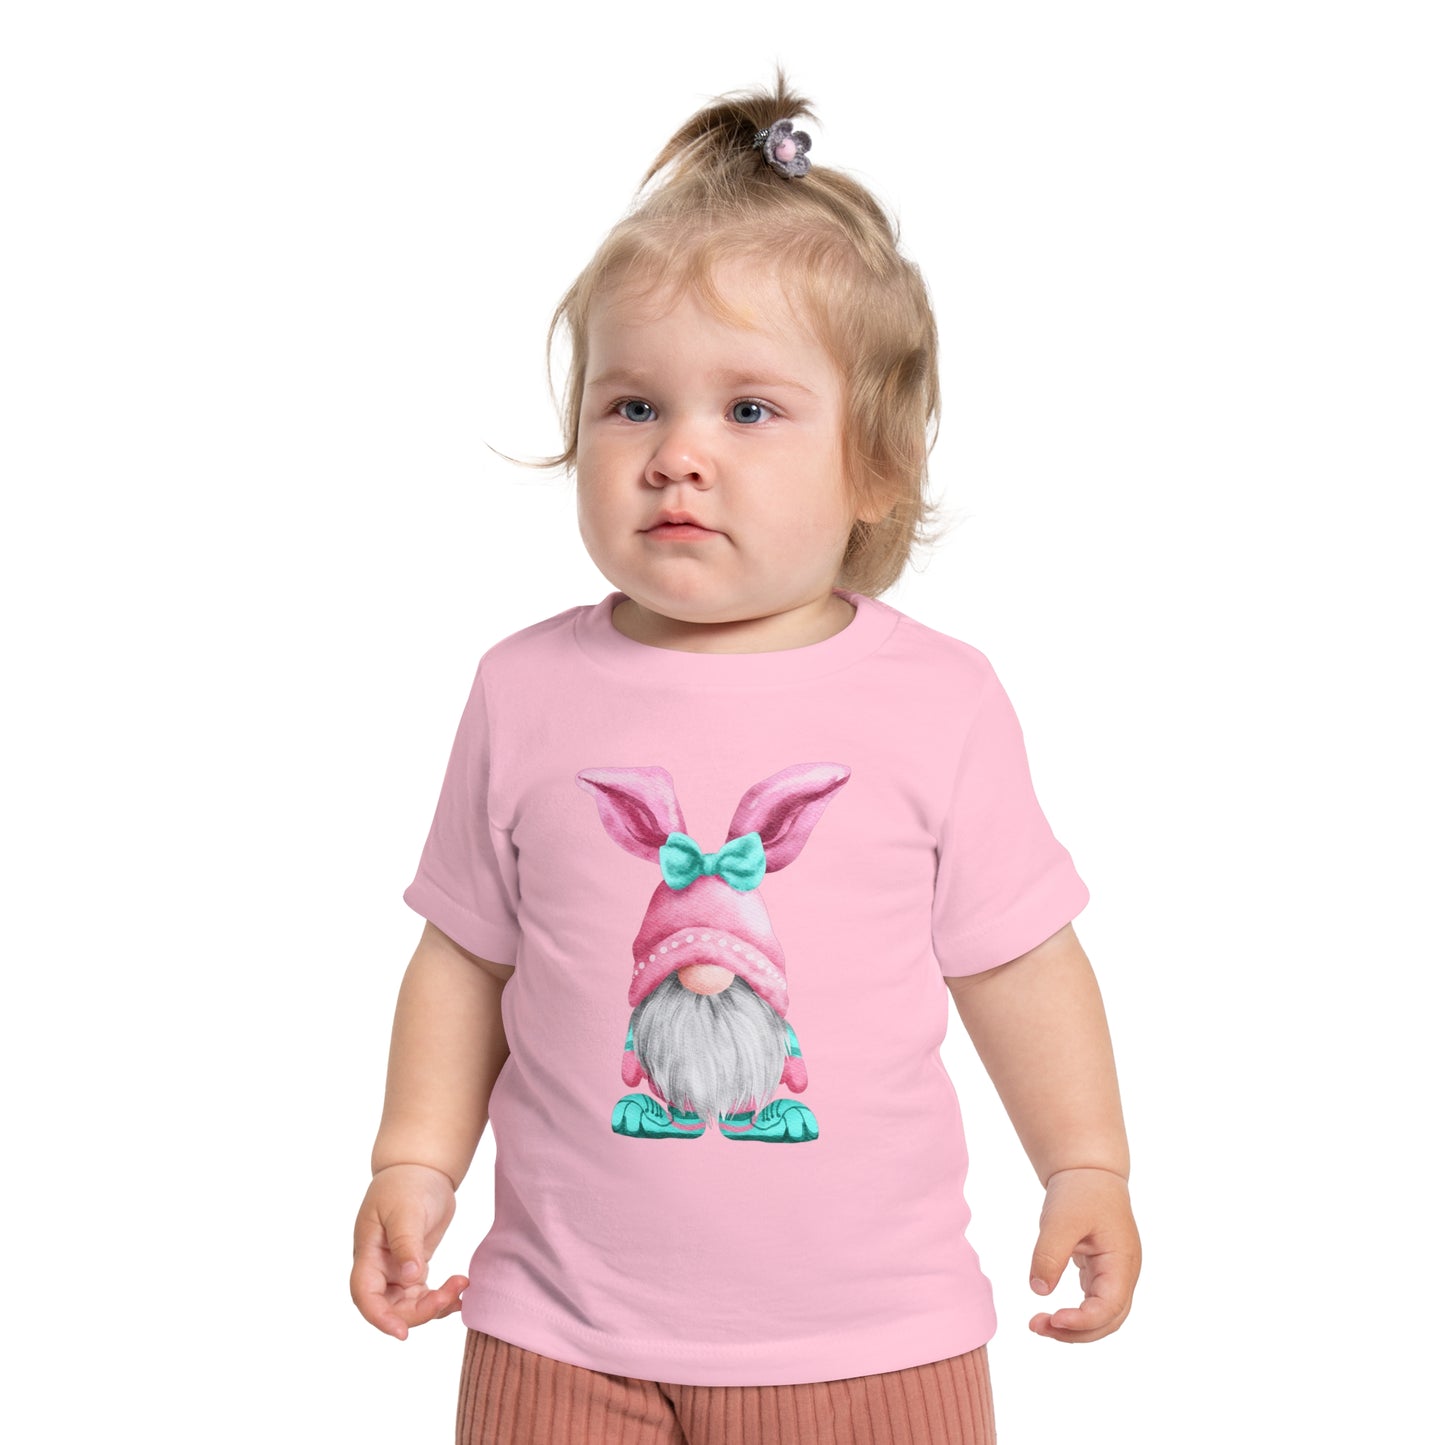 Toddler in a Baby's Easter-Gnome T-shirt with a bunny print, looking slightly puzzled.